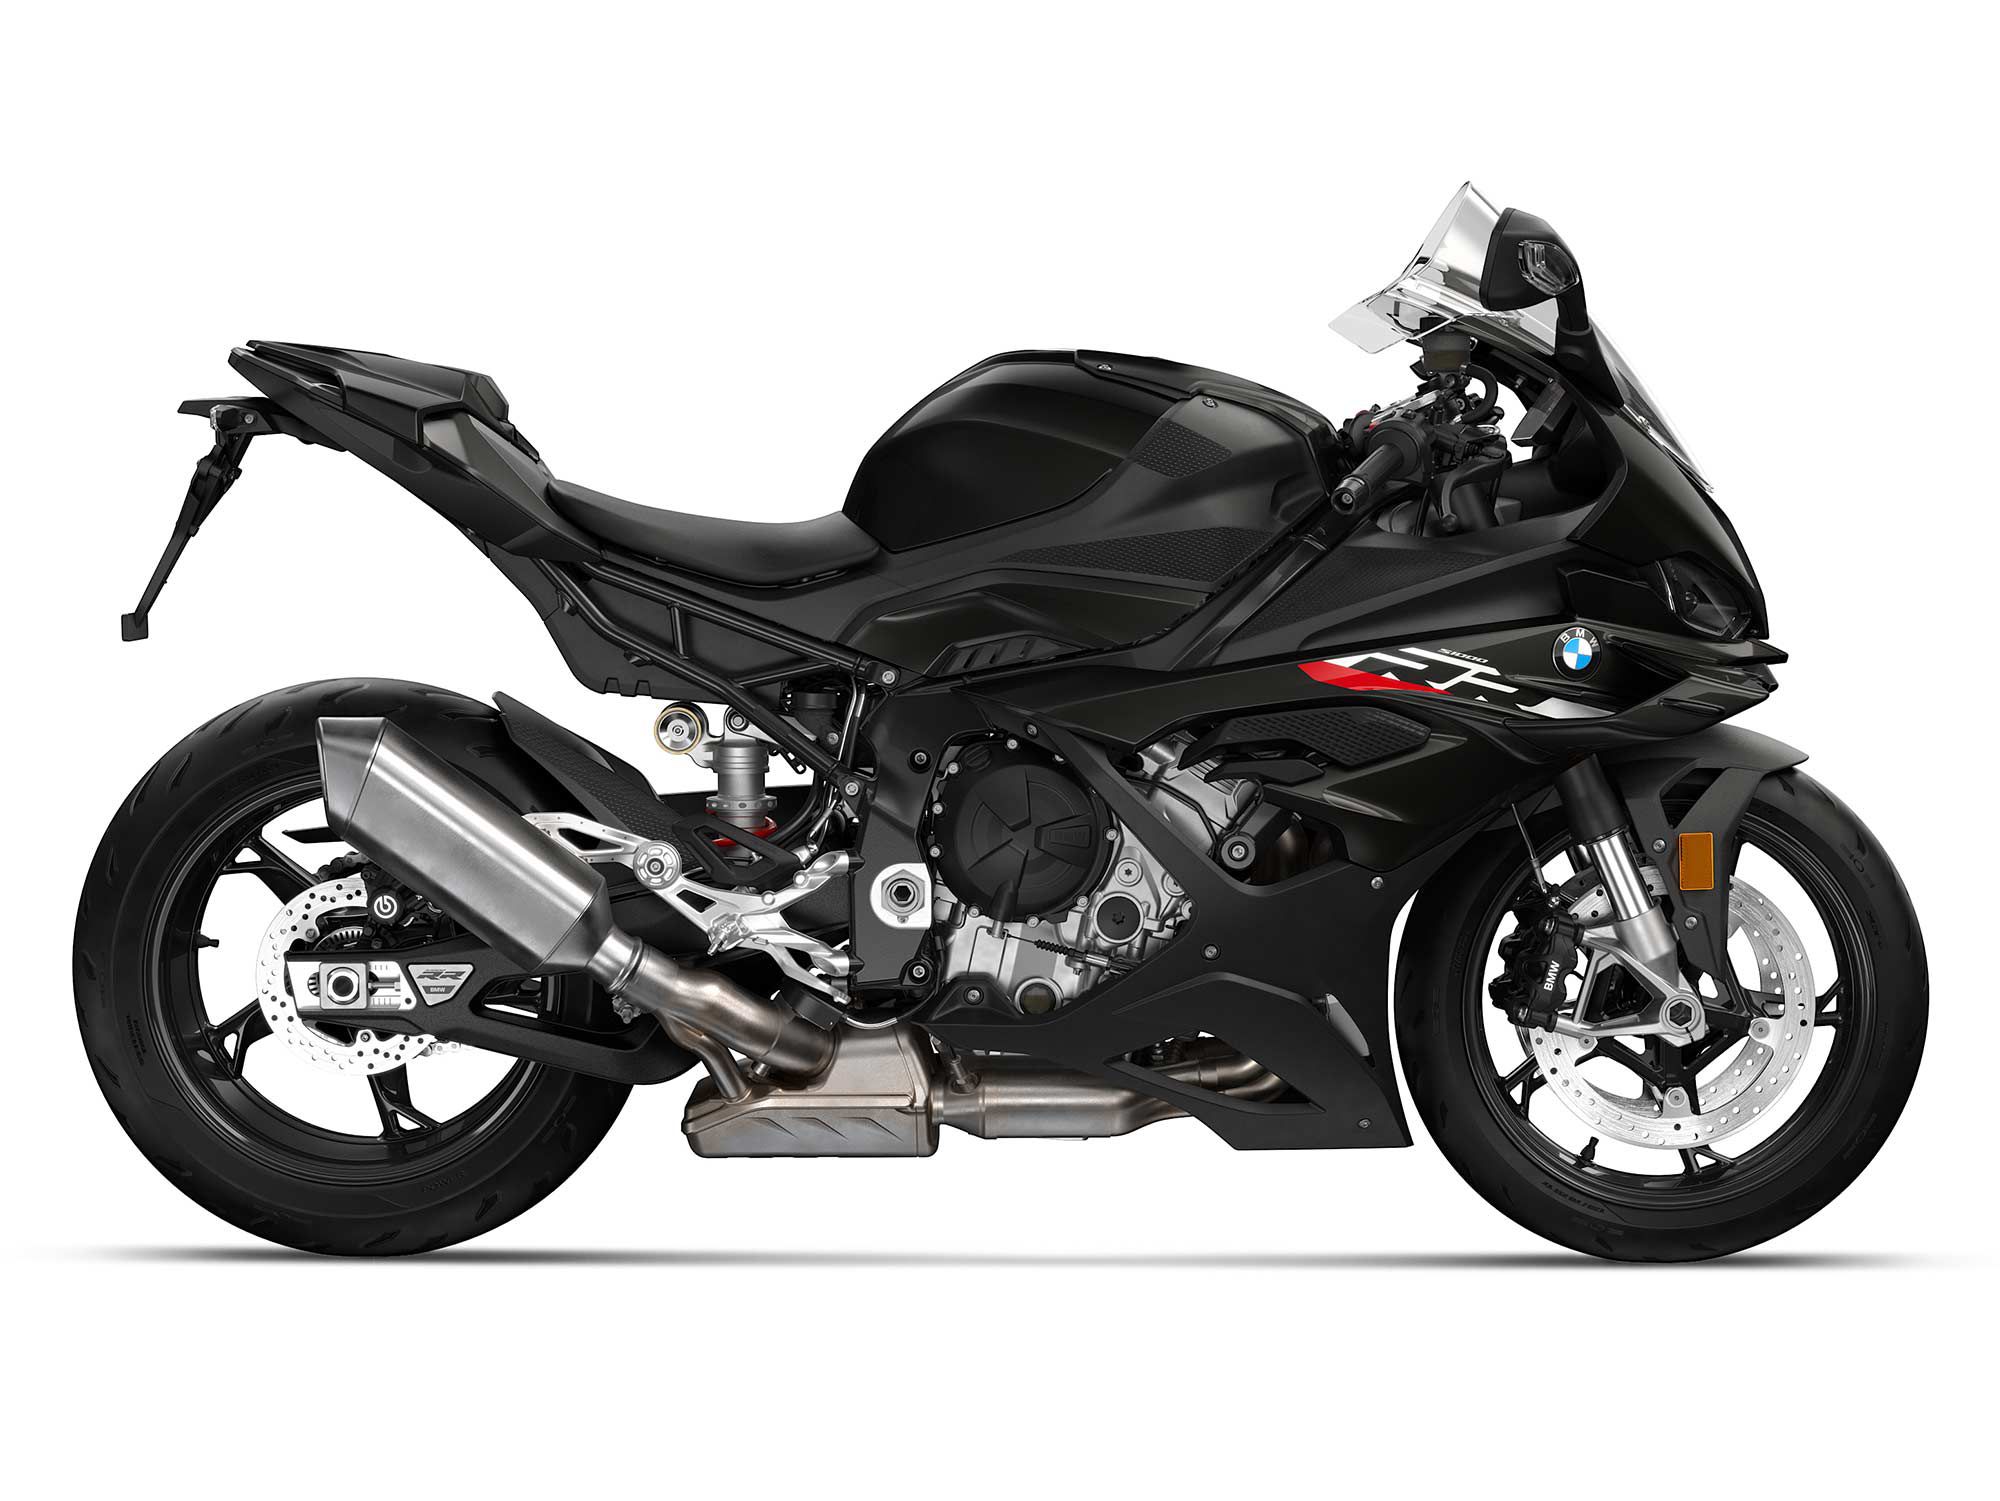 BMW continues to fine-tune its ultra-capable S 1000 RR. Updated for 2023, the bike is even more track focused, with updates to the chassis, engine, and aerodynamics.